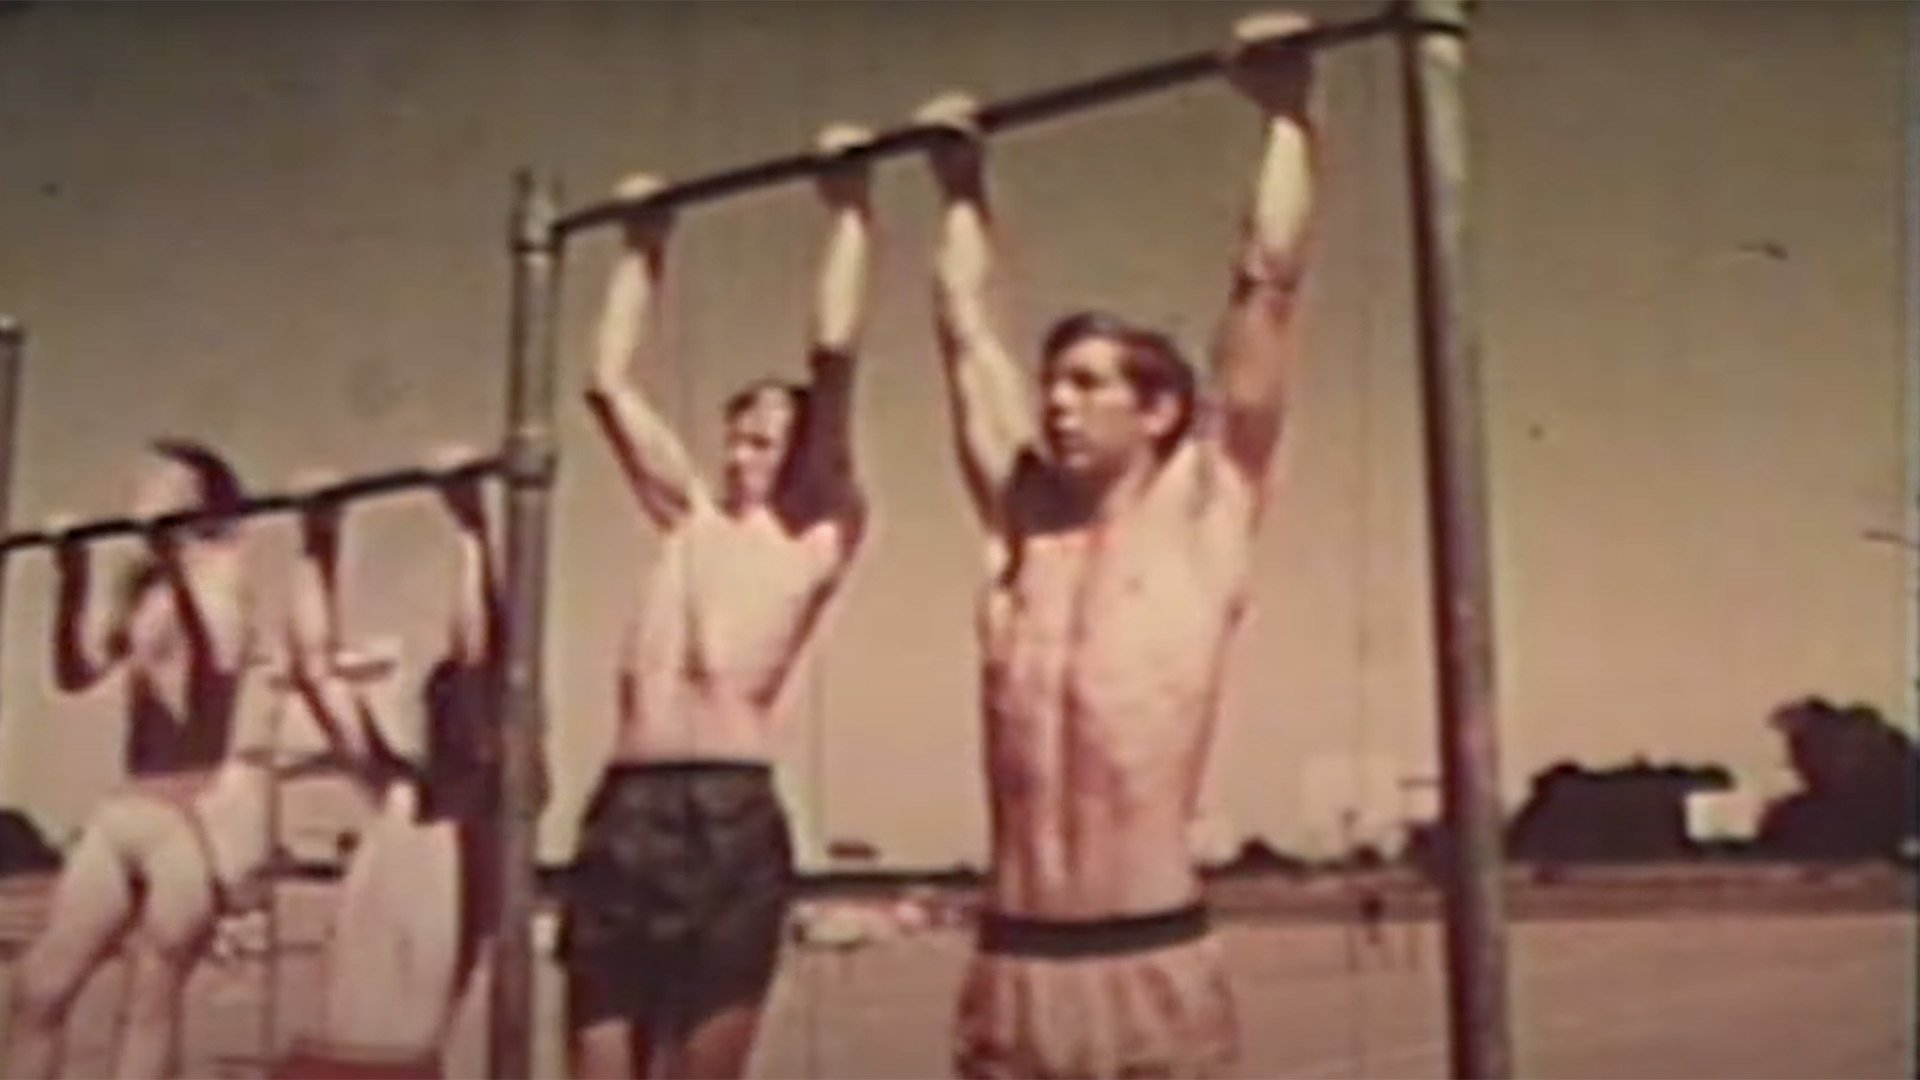 Believe it or not, there was a time in American history where gym class consisted of more than just kickball. Screenshot from YouTube.